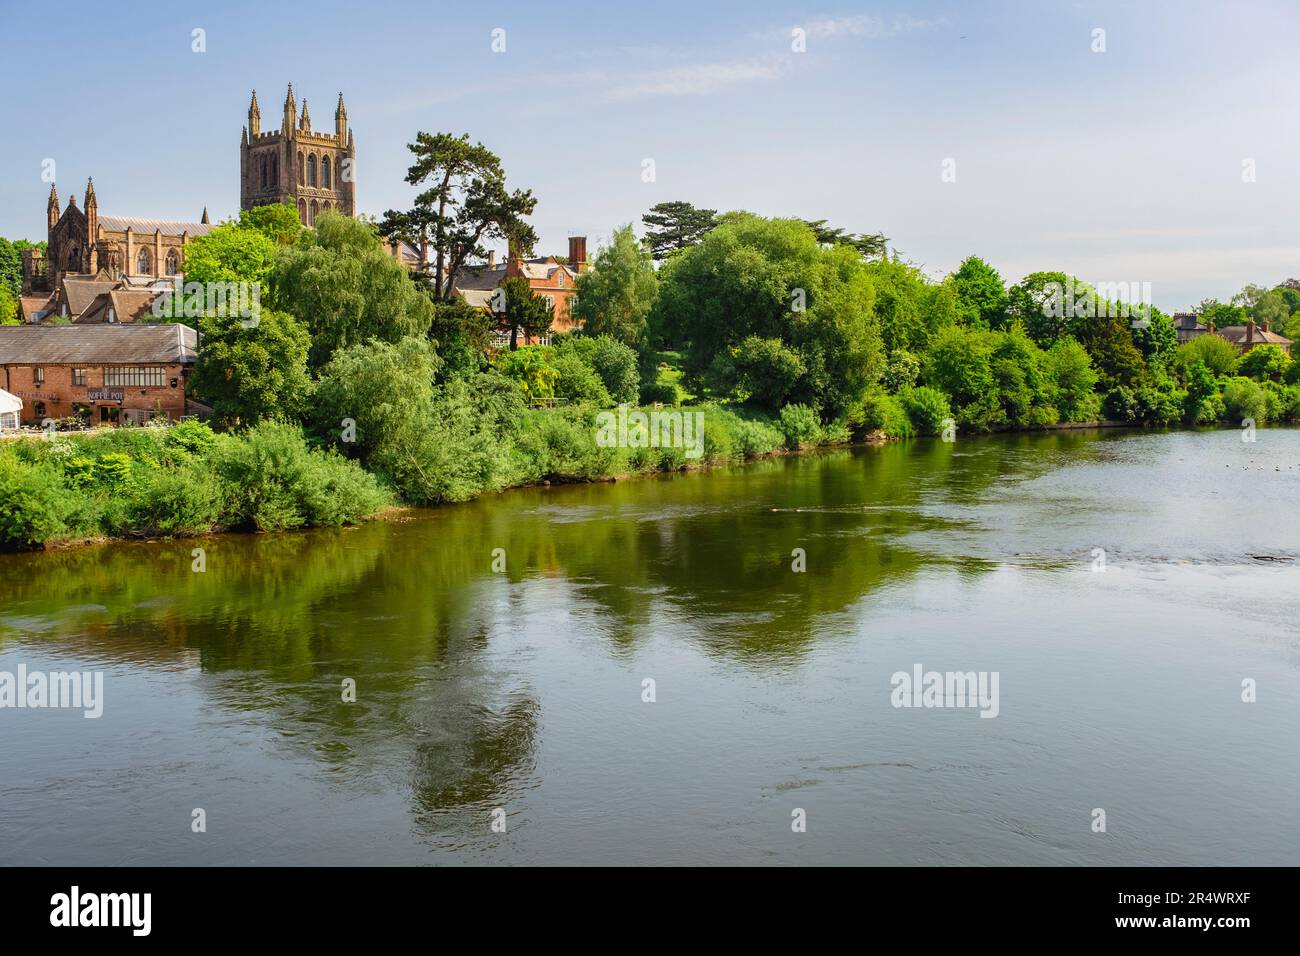 View across the River Wye reflecting the Cathedral of Saint Mary the Virgin in Hereford, Herefordshire, England, UK, Britain Stock Photo